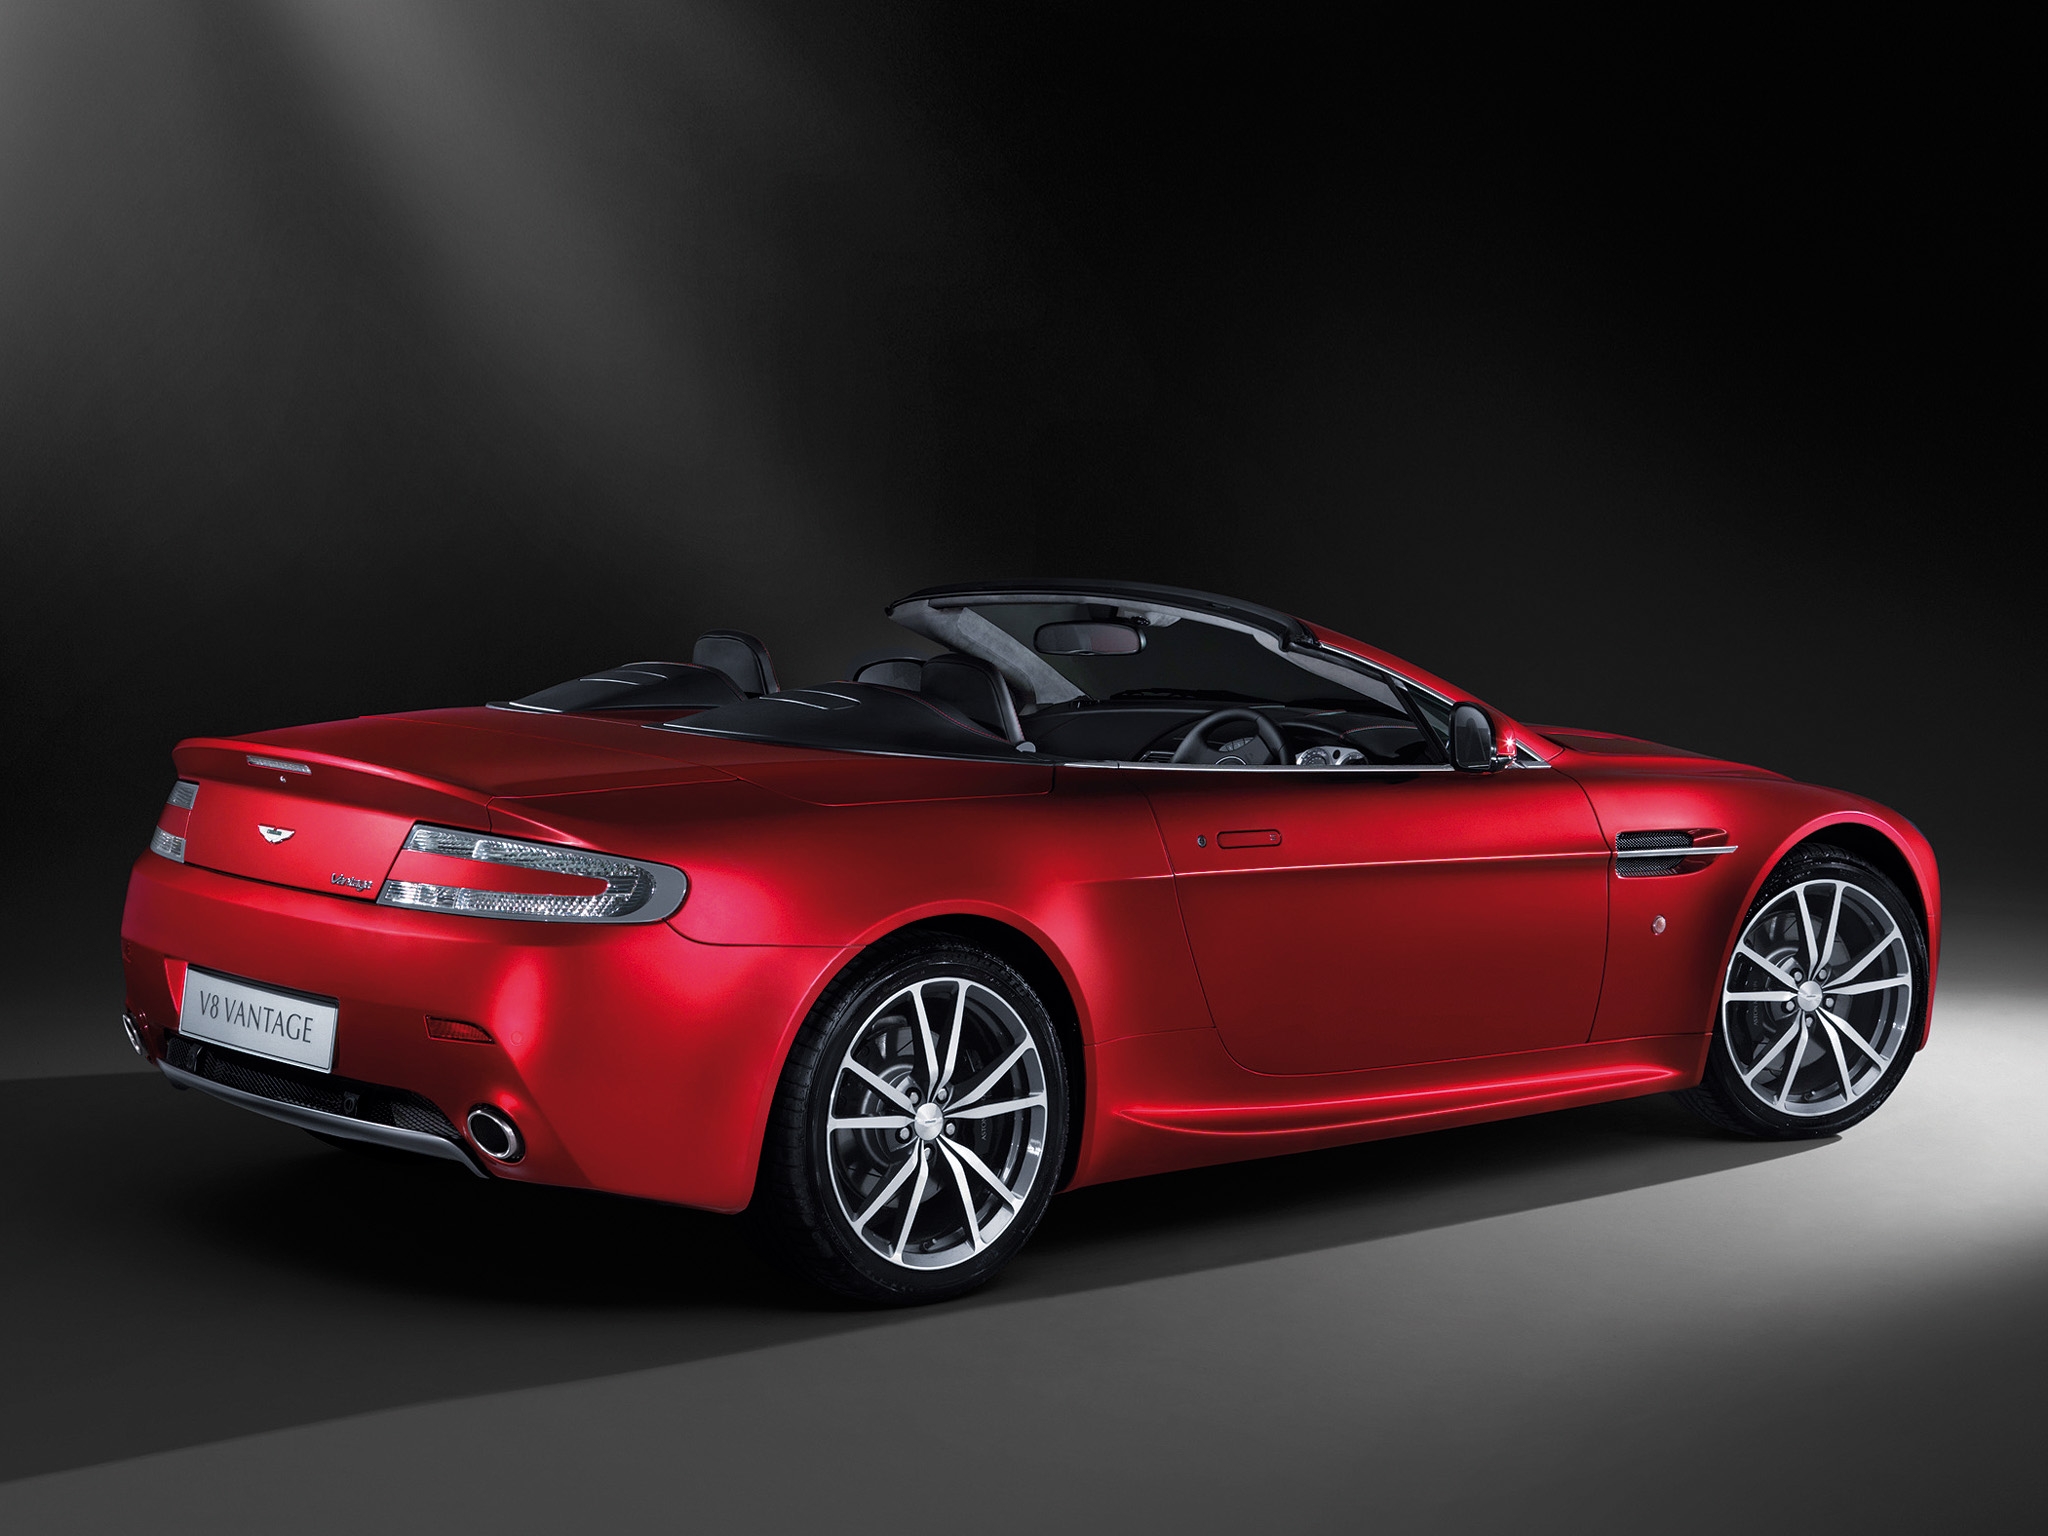 aston martin, cars, red, side view, style, cabriolet, 2008, v8, vantage images